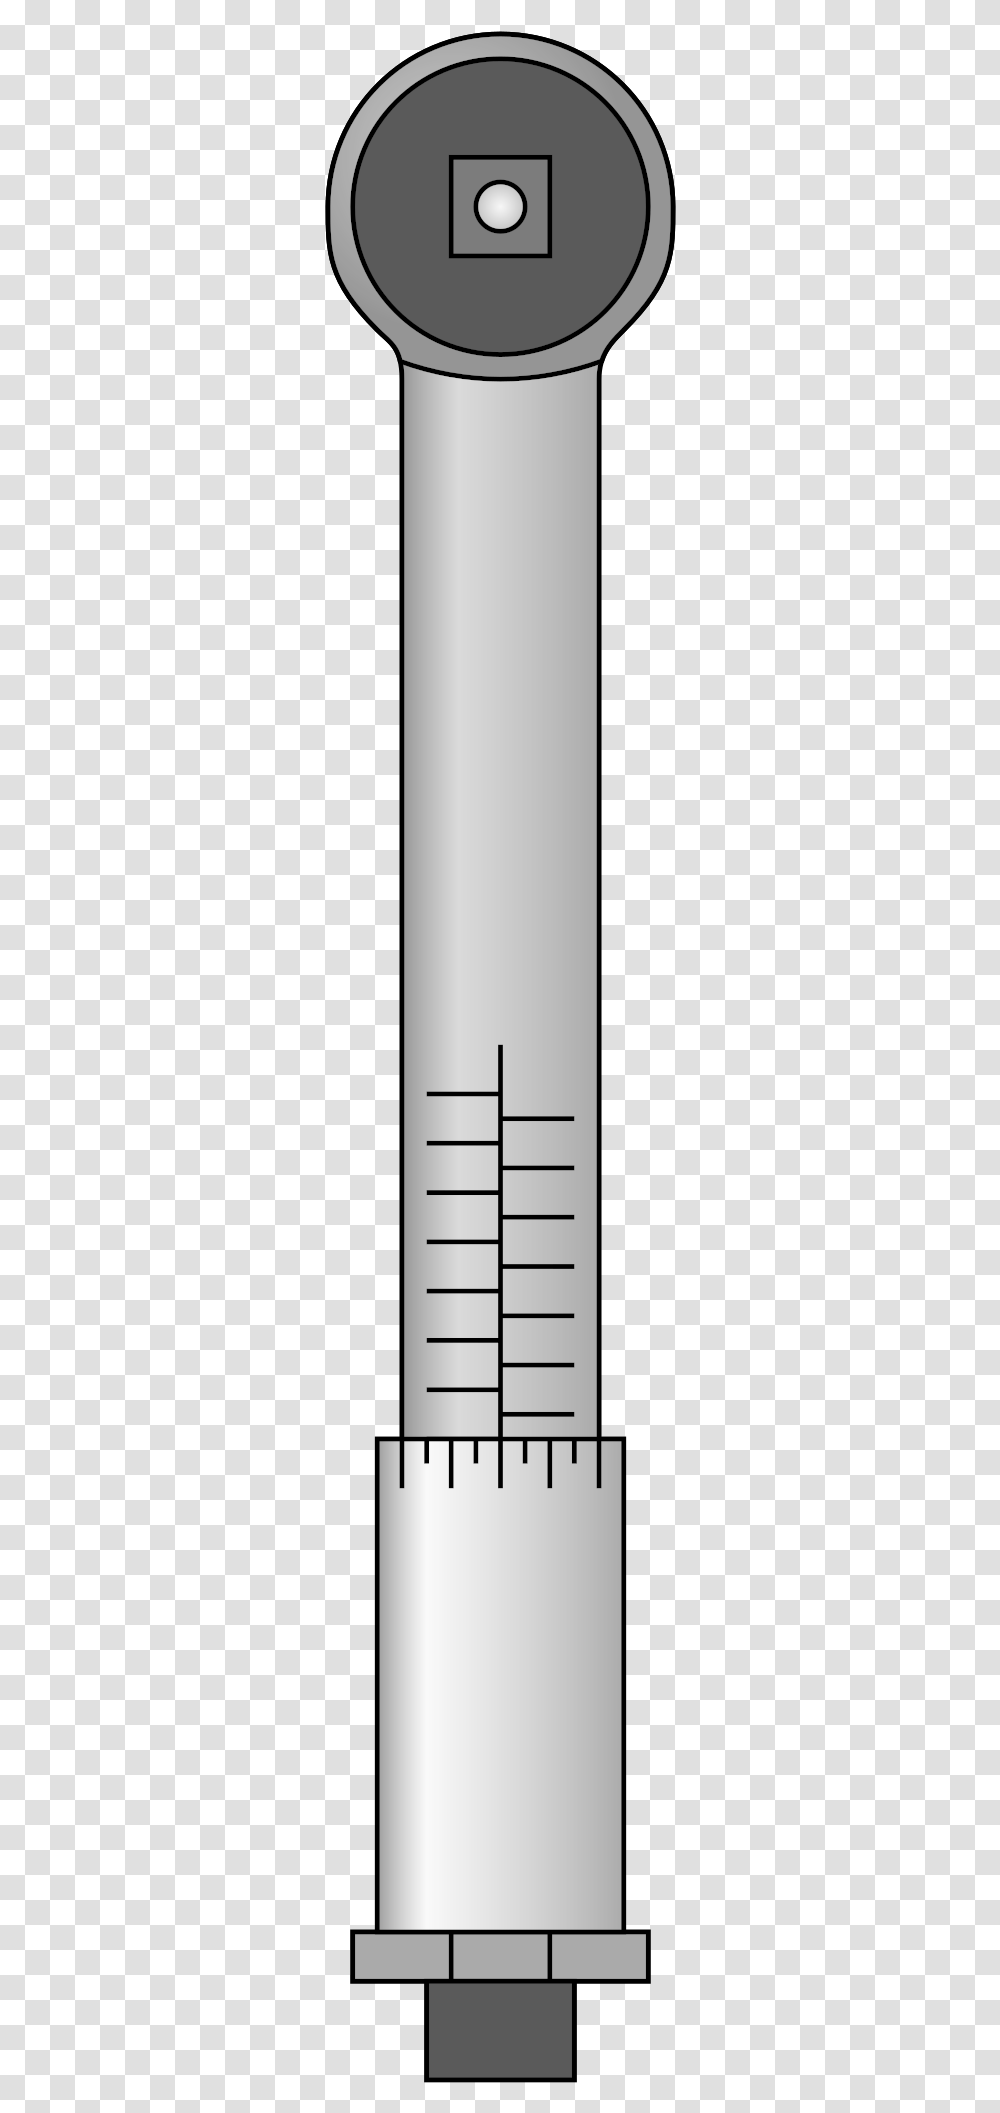 Torque Wrench Clip Arts Torque Wrench Clipart, Plot, Diagram, Cylinder Transparent Png